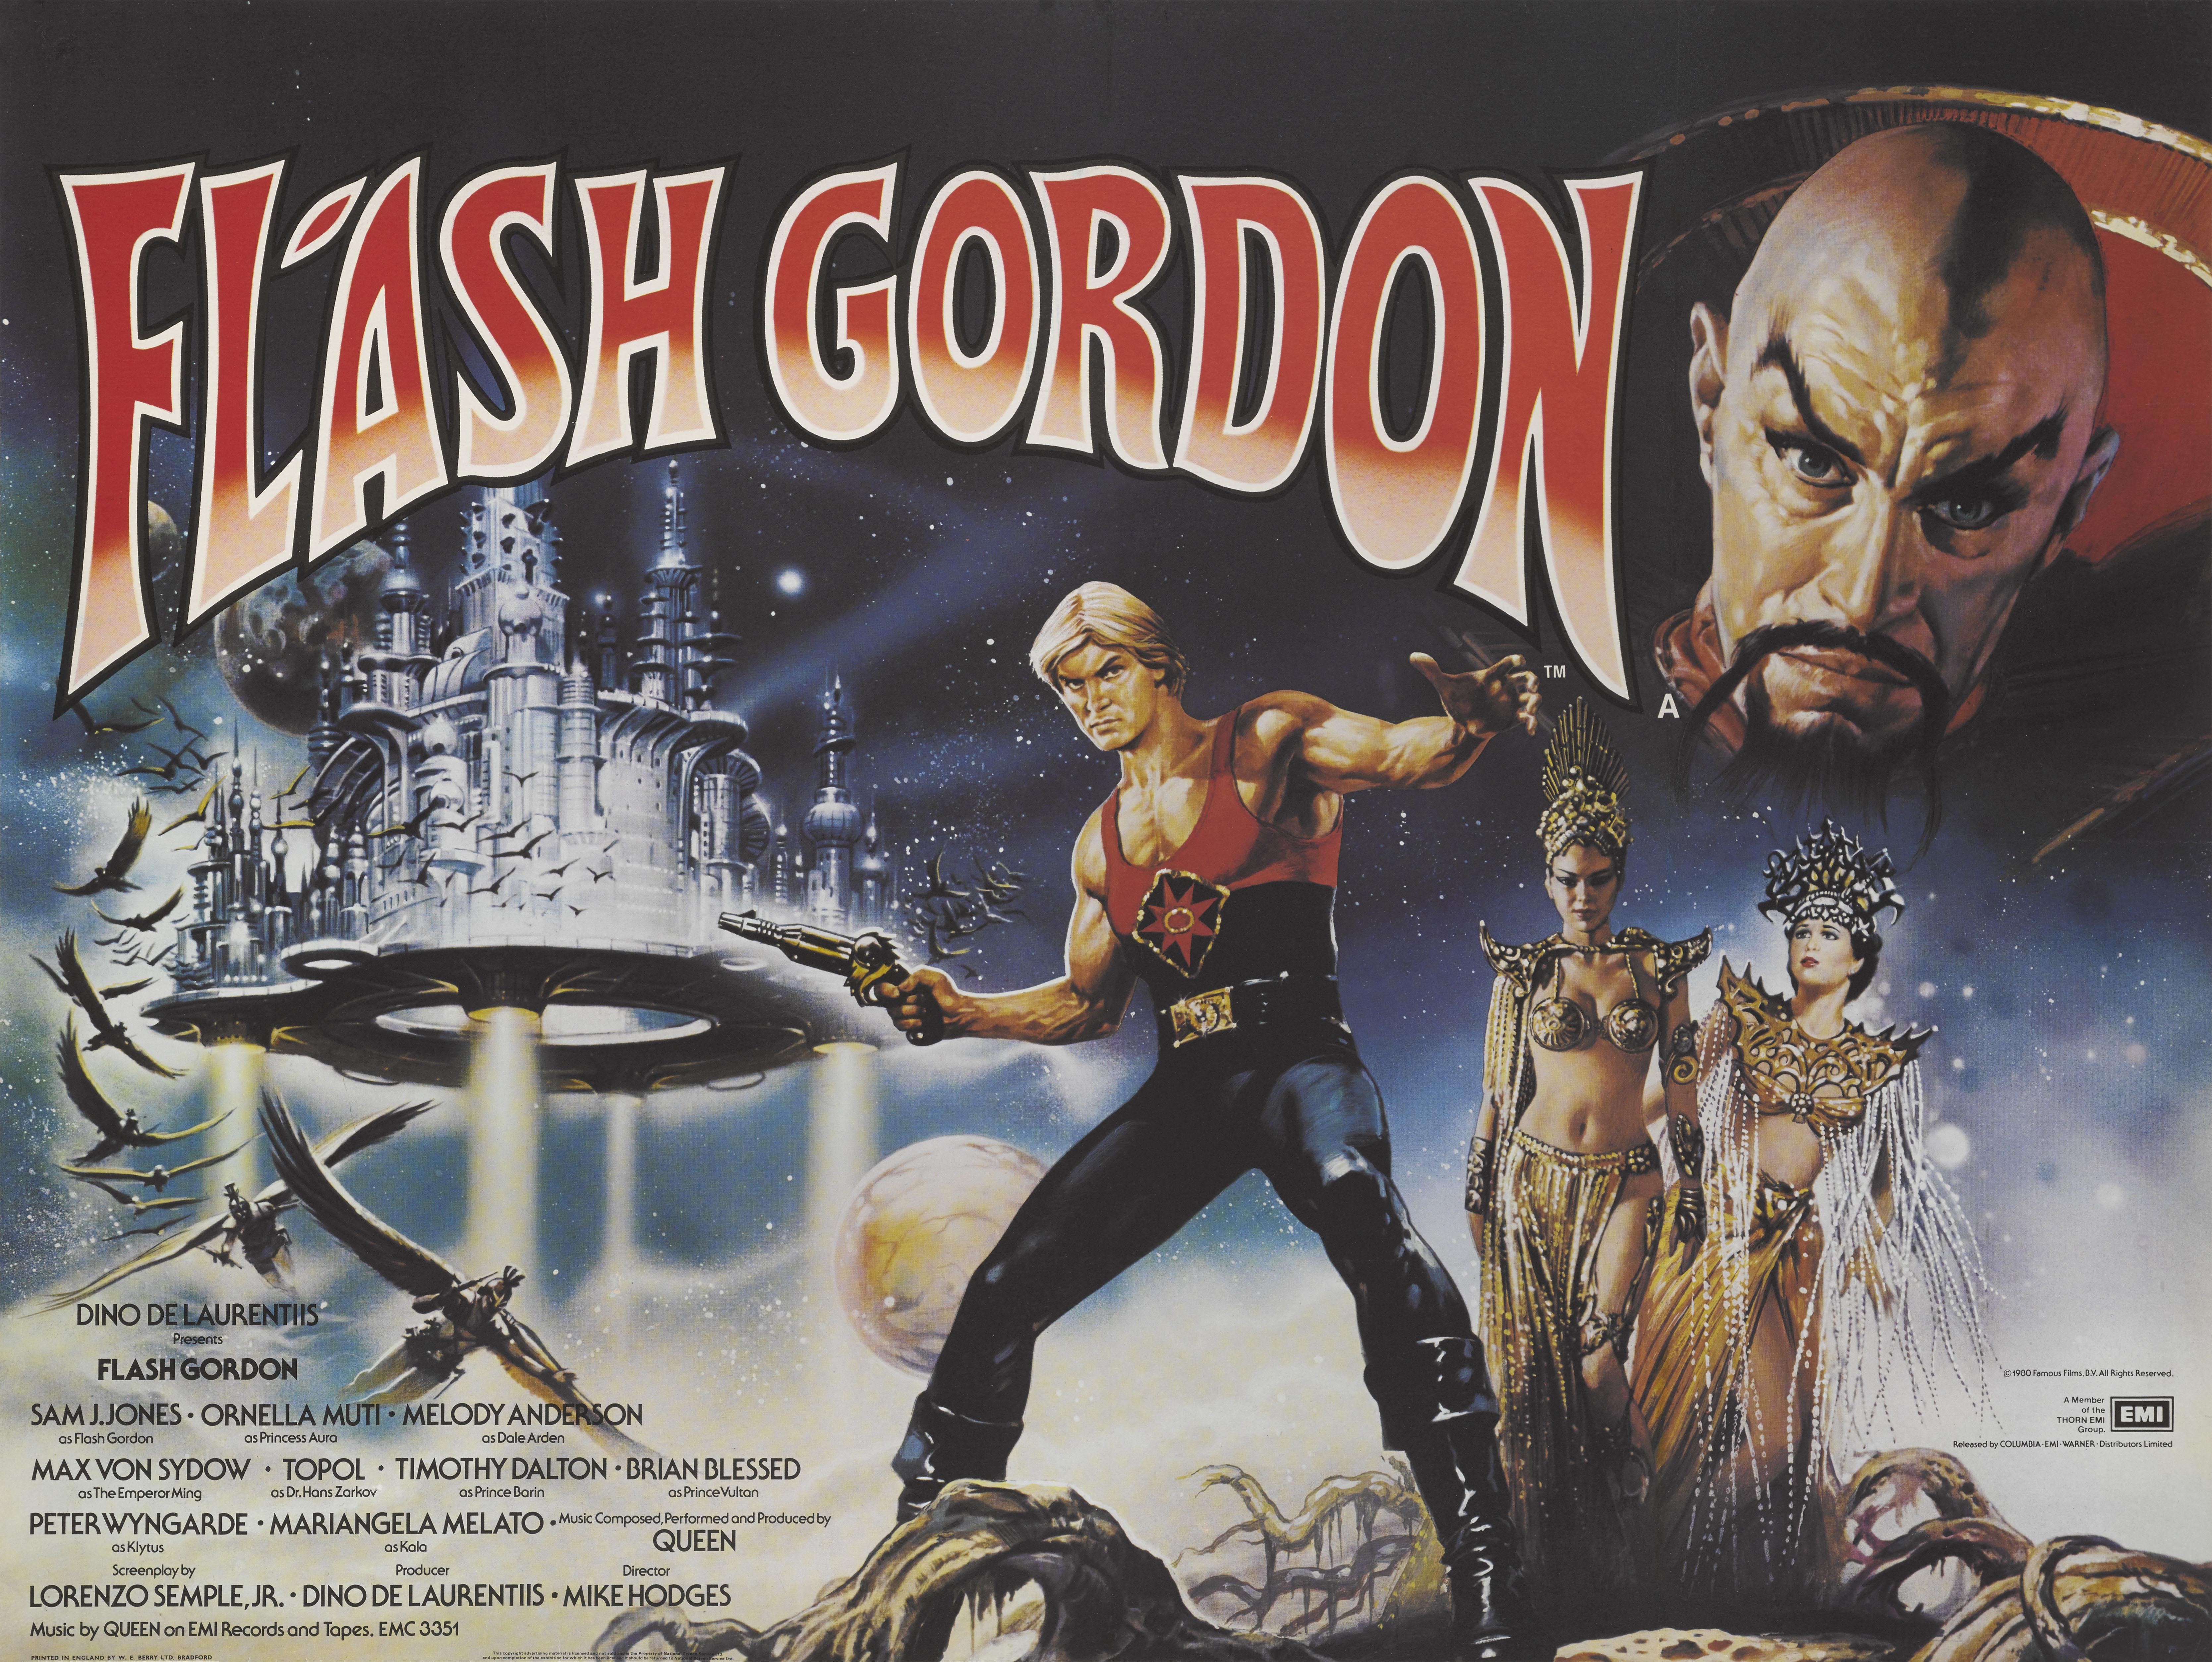 Original British film poster for the 1980 Science fiction adventure film Flash Gordon 
The film was directed by Mike Hodges and starred Sam J. Jones, Melody Anderson and Max von Sydow.
This poster is conservation linen backed and it would be